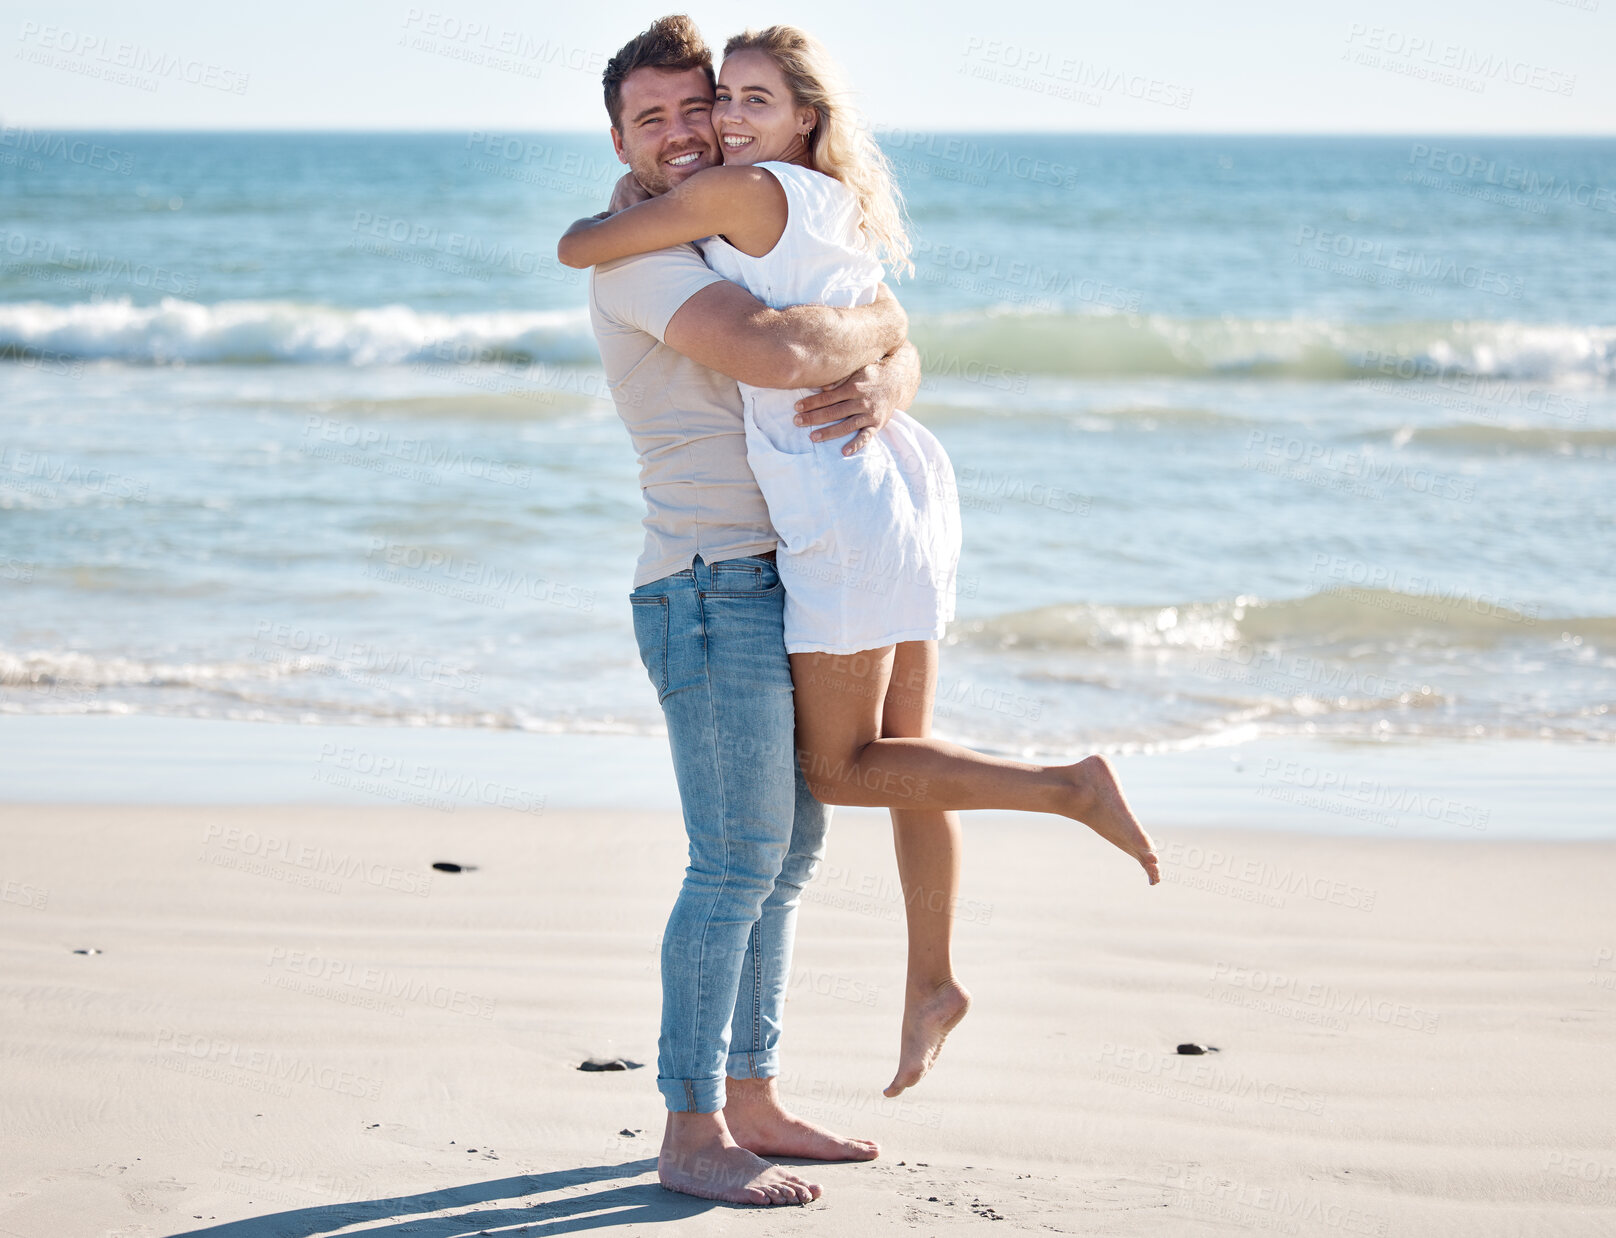 Buy stock photo Hug, love and portrait of a couple on the beach on a summer vacation, adventure or journey. Happiness, smile and romantic man and woman embracing by the ocean while on a date on seaside holiday.